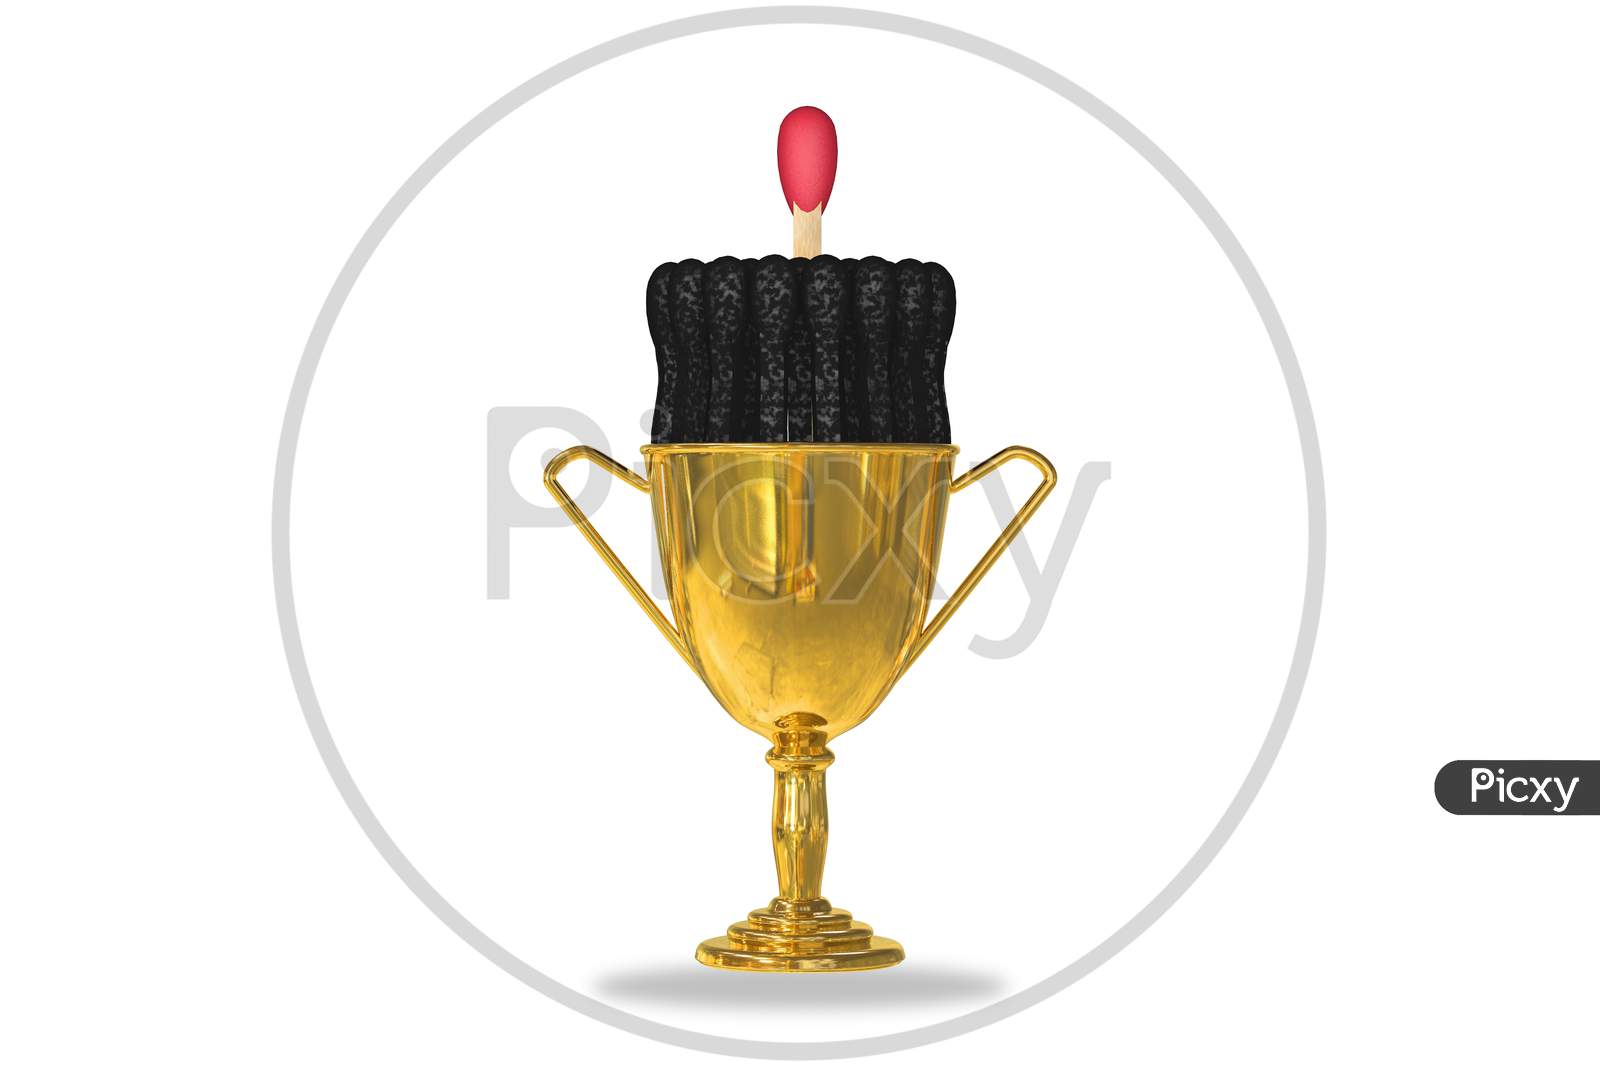 Golden Trophy Cup Isolated On White Background With Burning Matches And With One Red Match On The Top Inside. Standing Out From The Crowd Or Go Your Own Way Or Being Different Concept. 3D Render